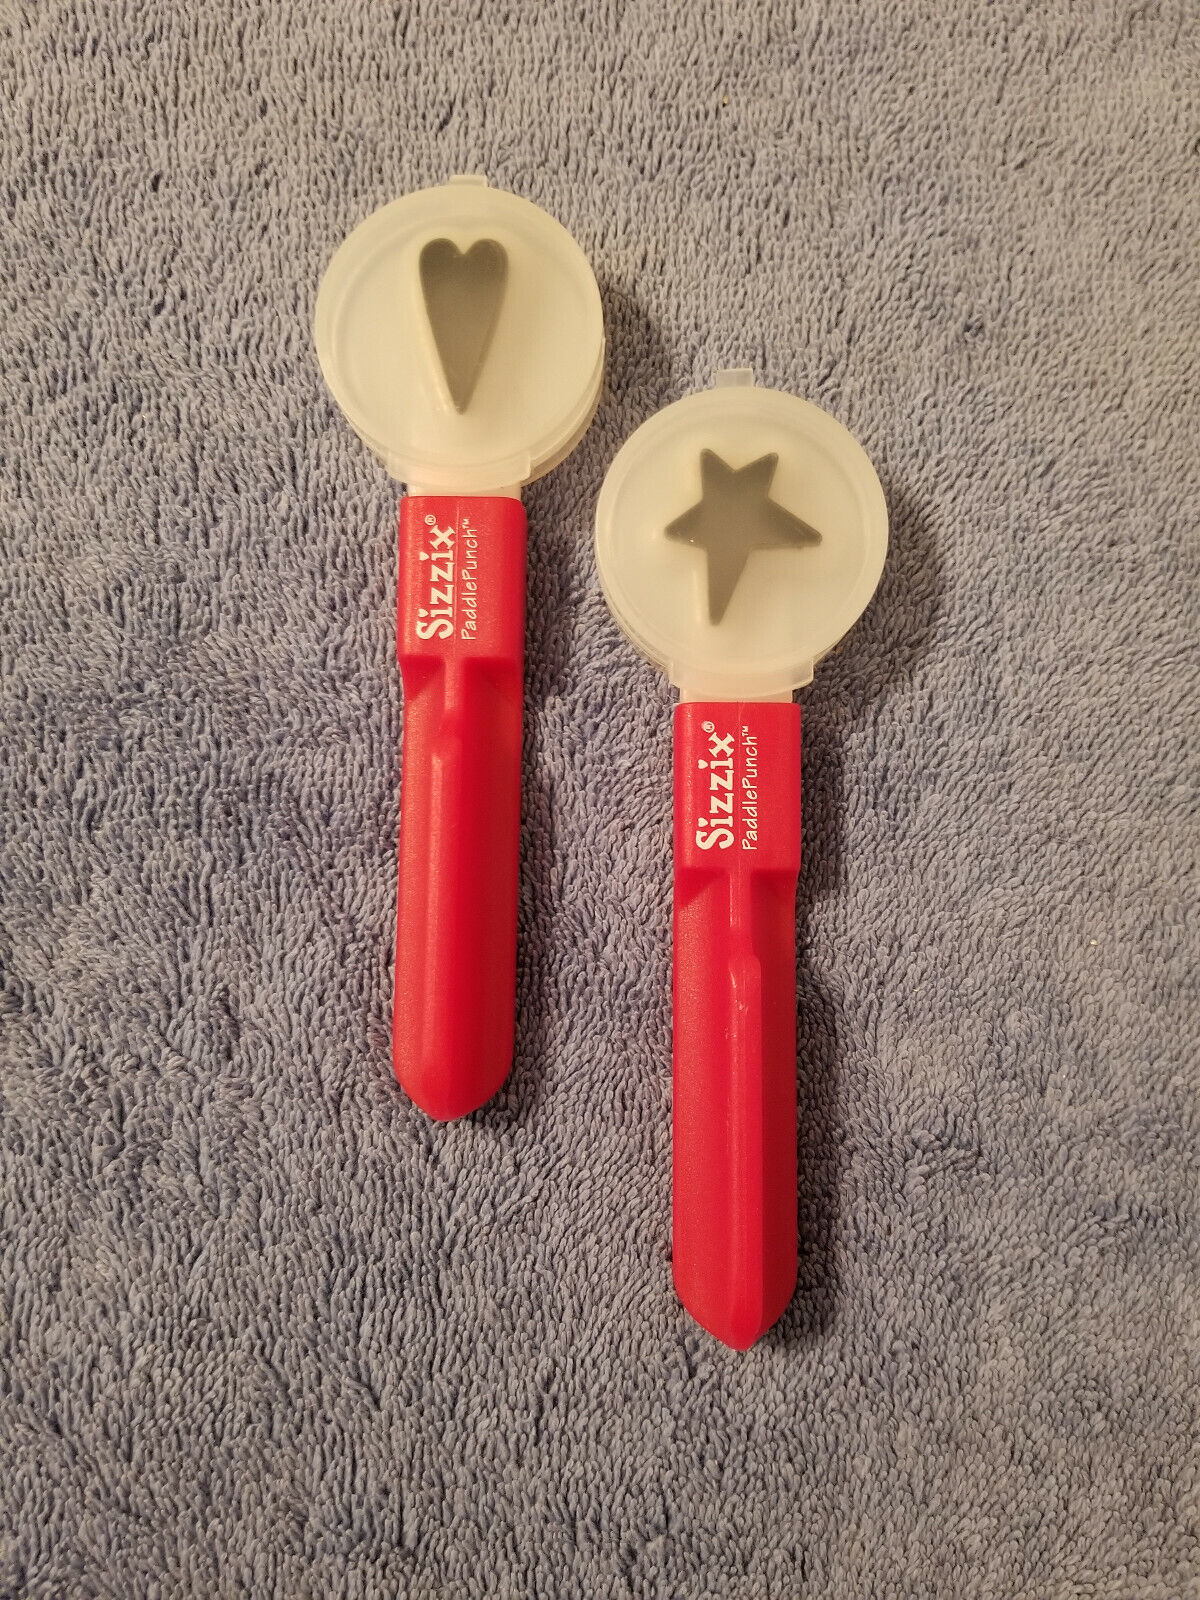 Sizzix Paddle Punch Heart & Star - $11.00